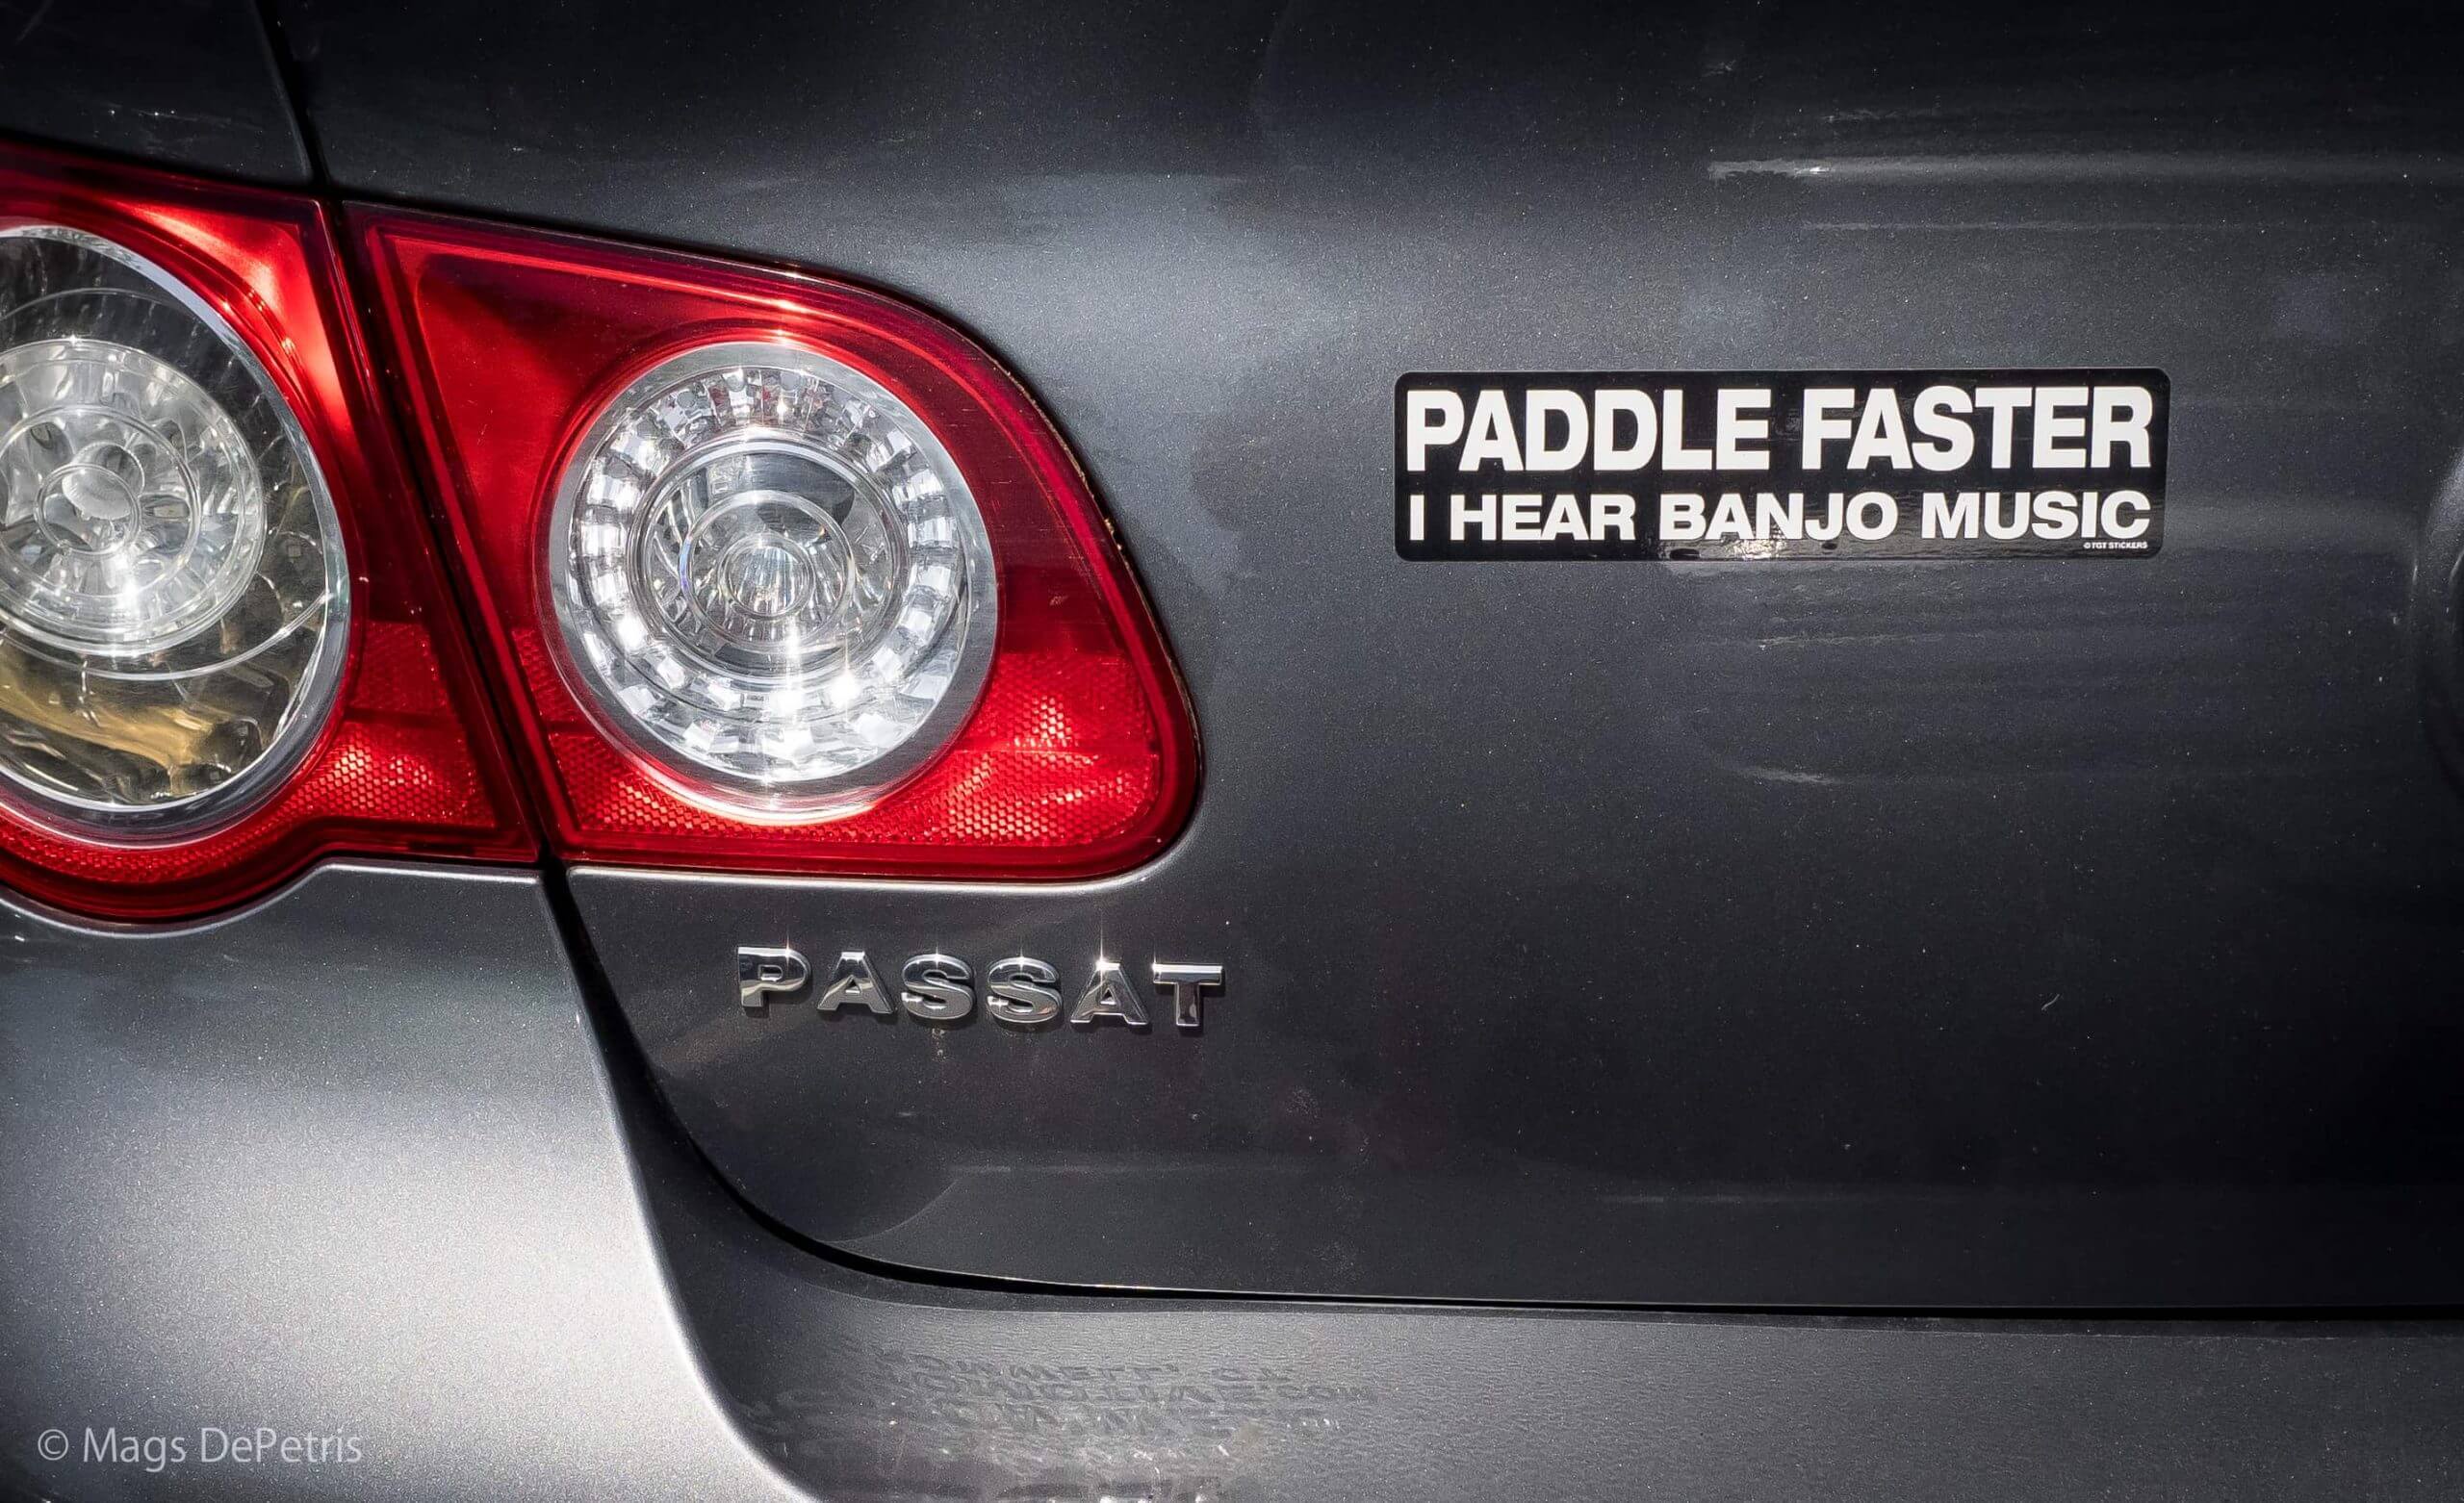 A tail light and bumper of a Passat car. A bumper sticker reads, "paddle faster I hear banjo music."